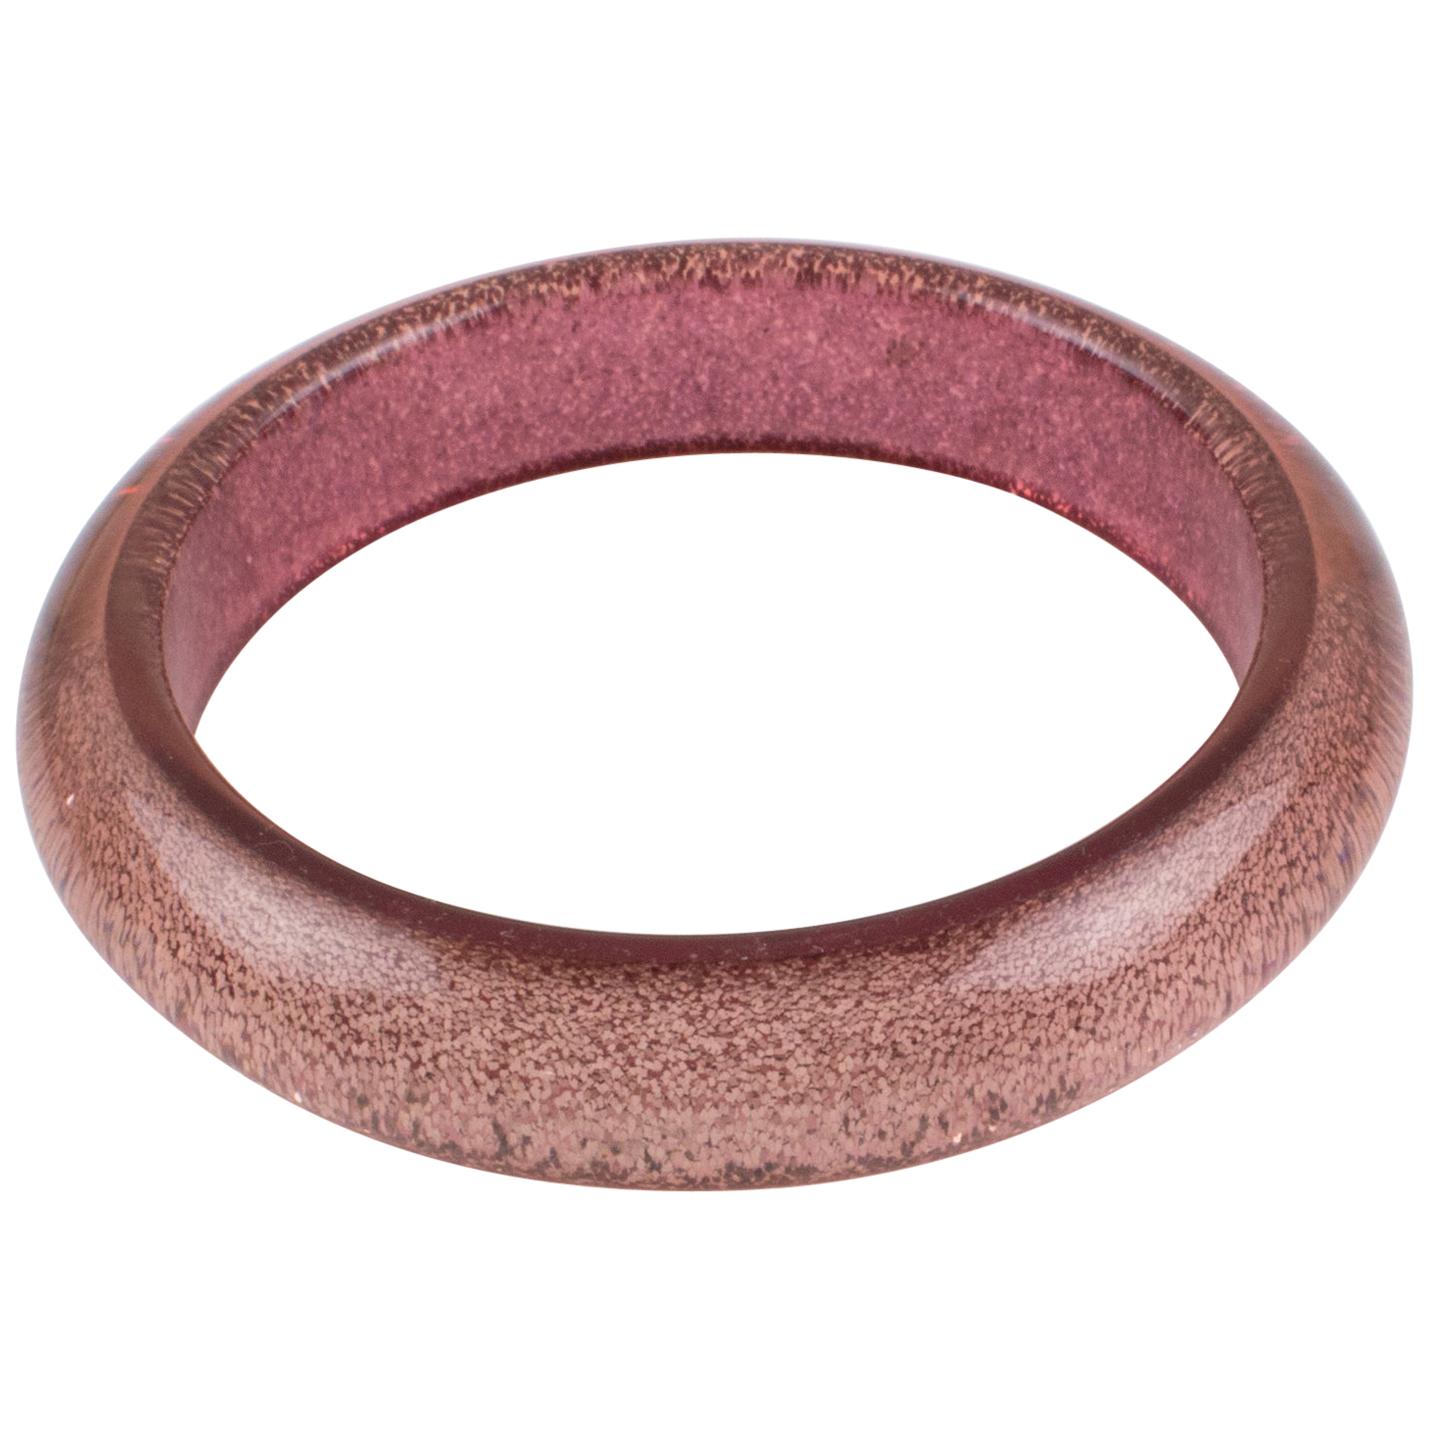 Striking Lucite bracelet bangle. The bangle has a domed shape and is comprised of transparent Lucite, which has metallic confetti injected inclusions in pink color. The metallic confetti has a texture, and glitter is like the lame fabric. There is